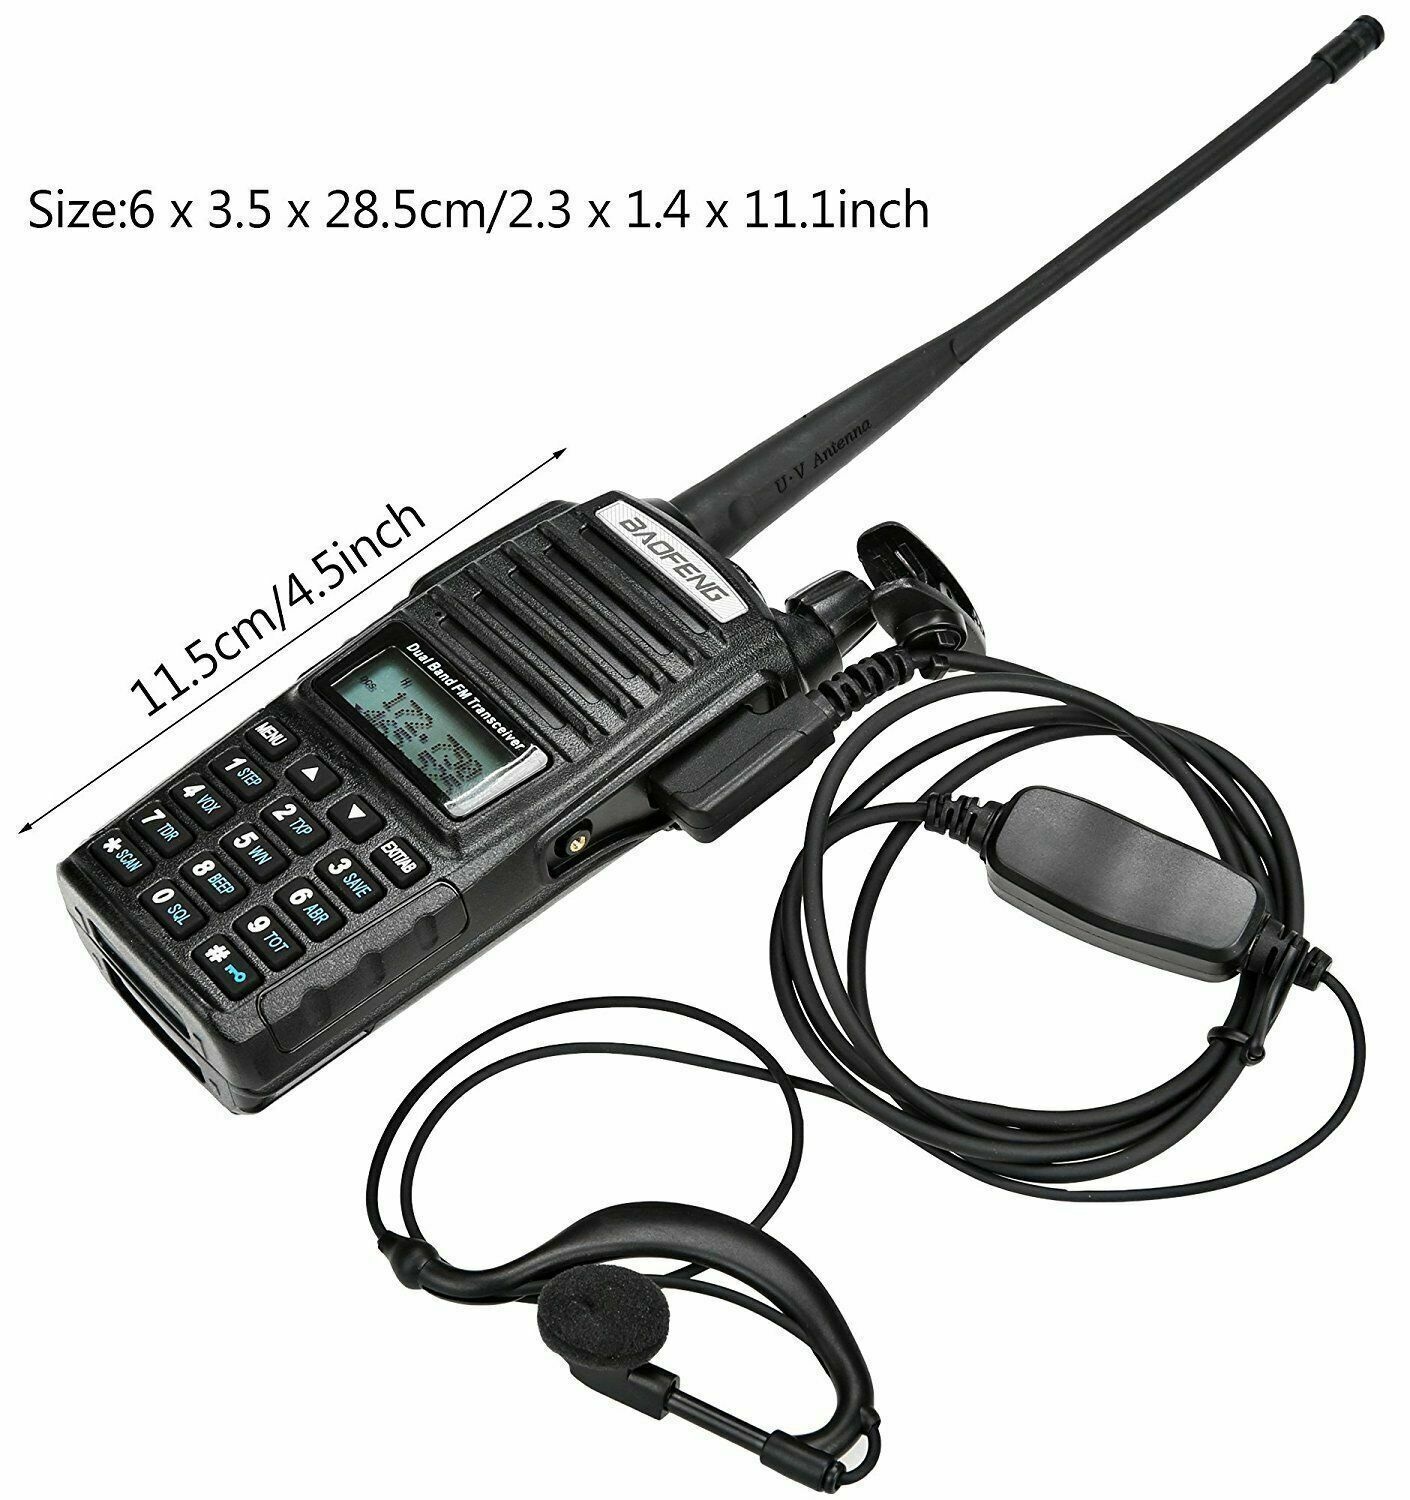  Walkie Talkie VHF UHF Dual Band Two Way Radios / Transceivers. Brand New Products